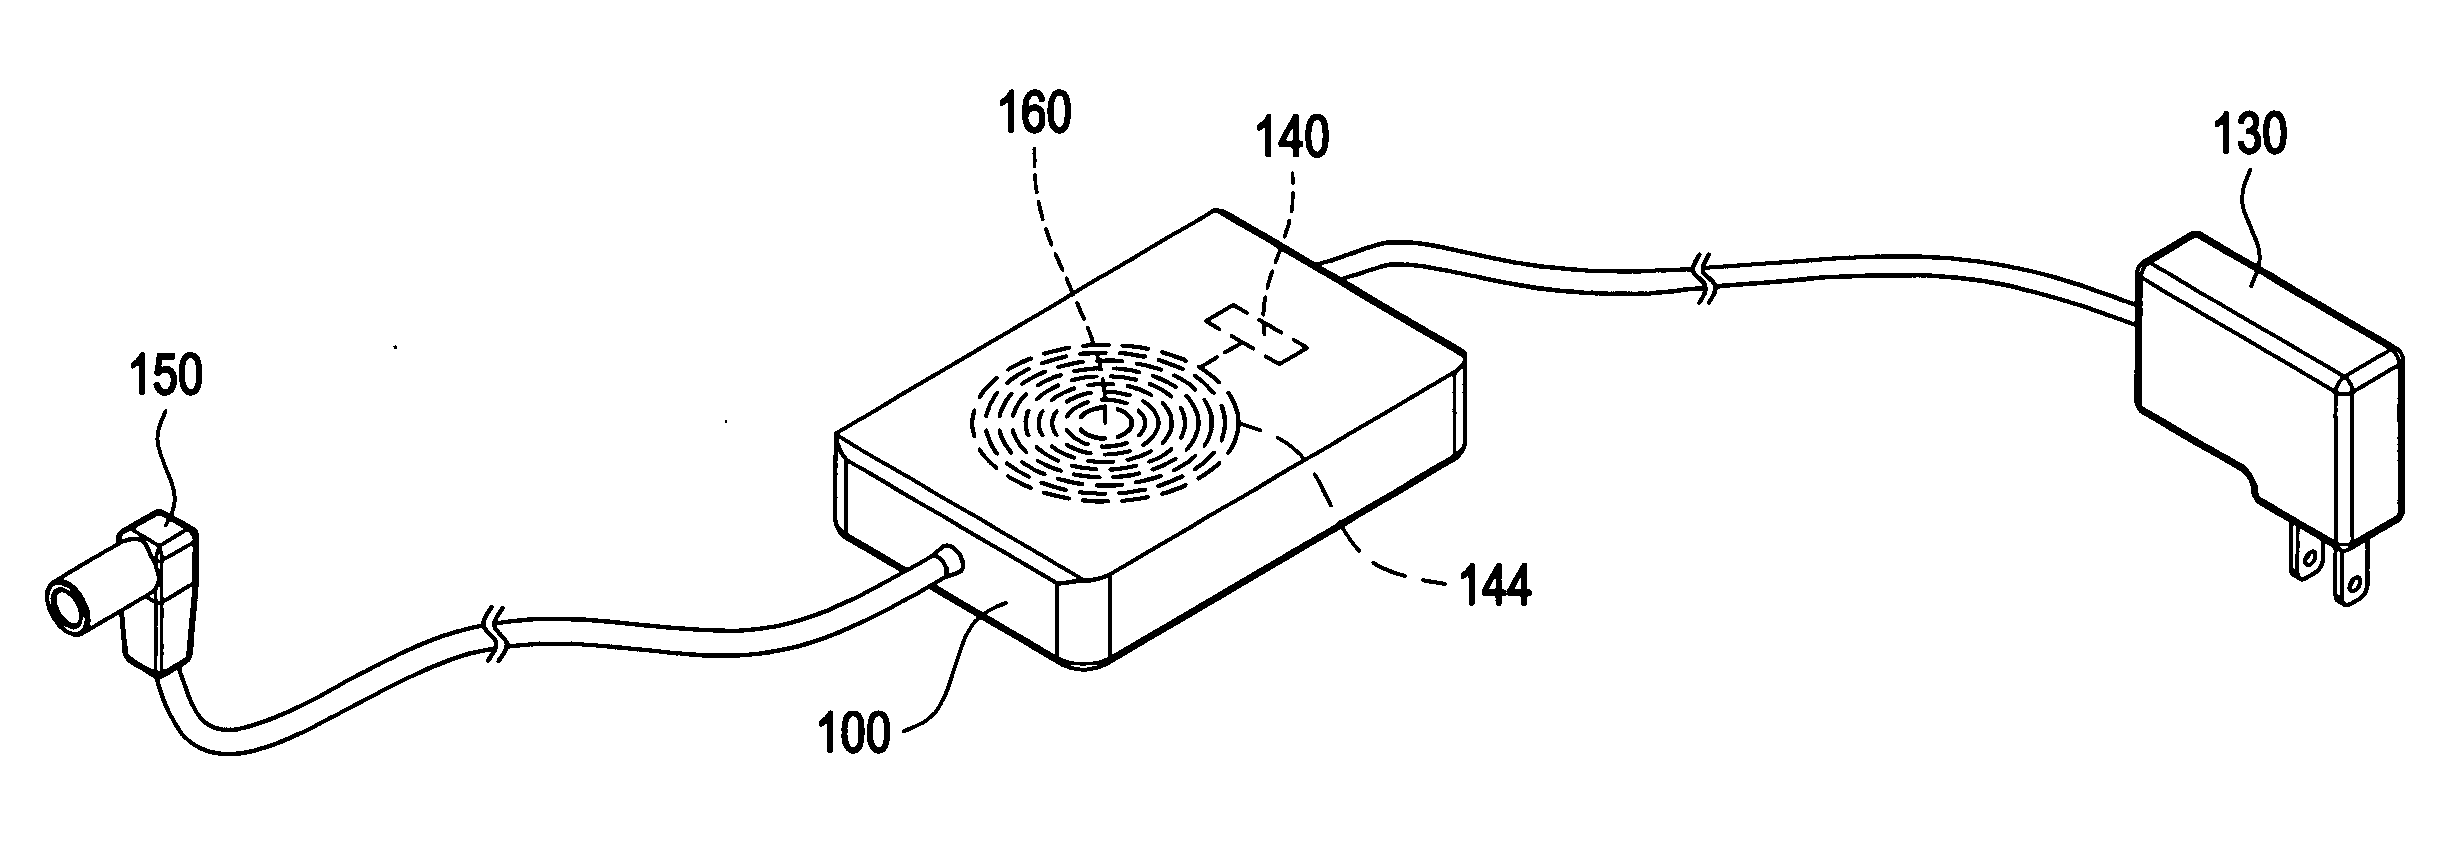 Adapter capable of wireless charging